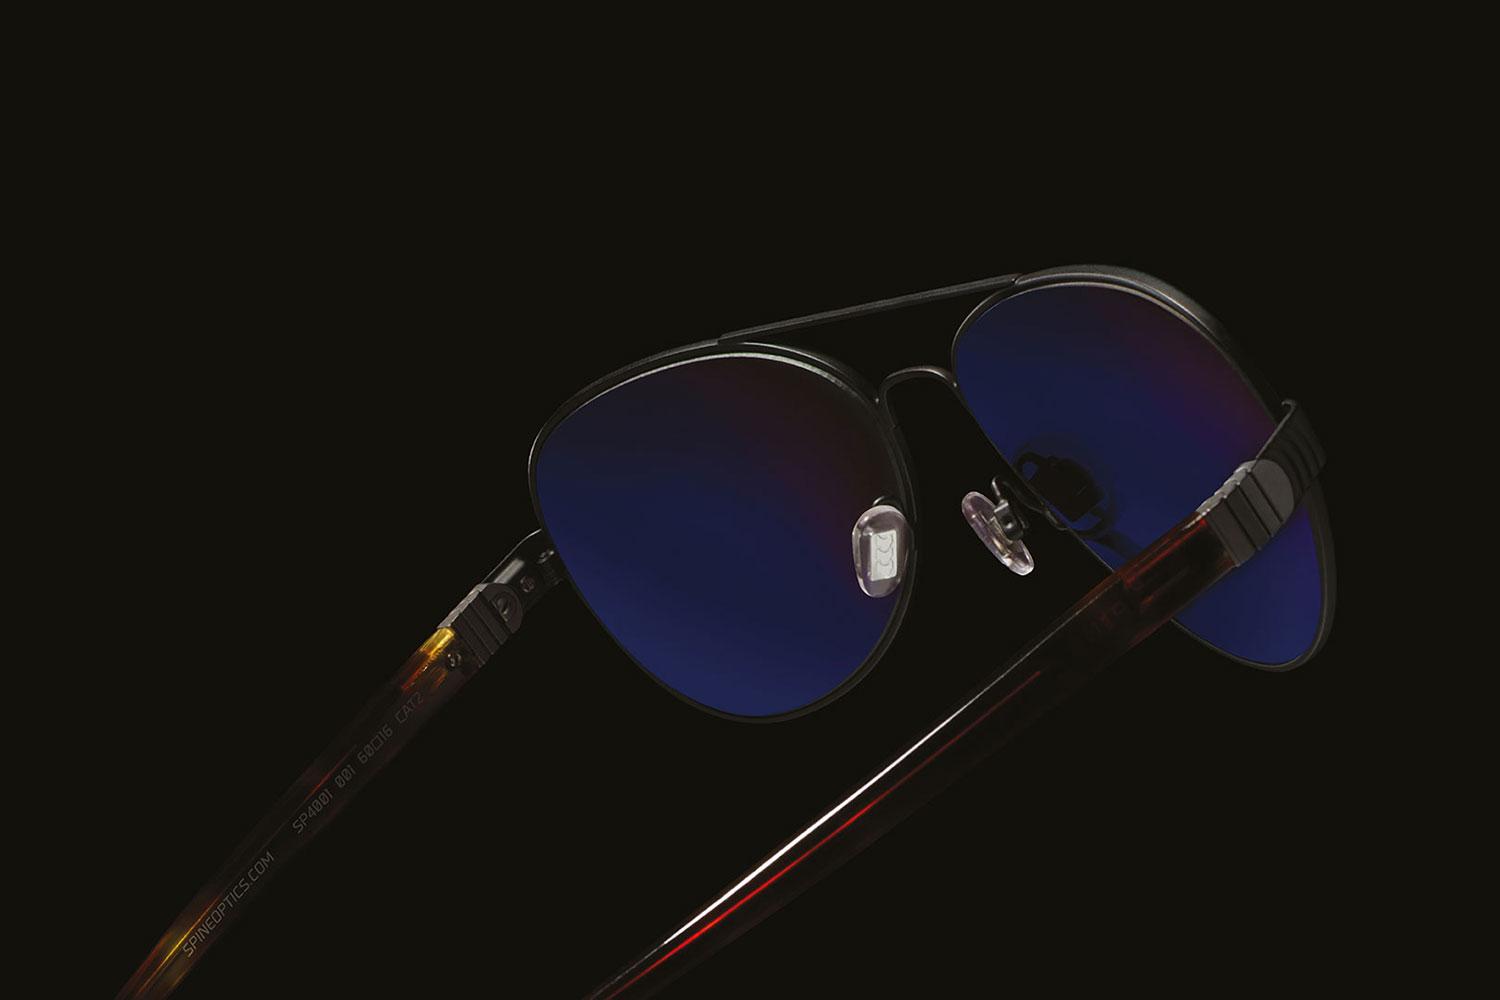 Spine Optics Reinvents The Hinge, And It's Great | Digital Trends